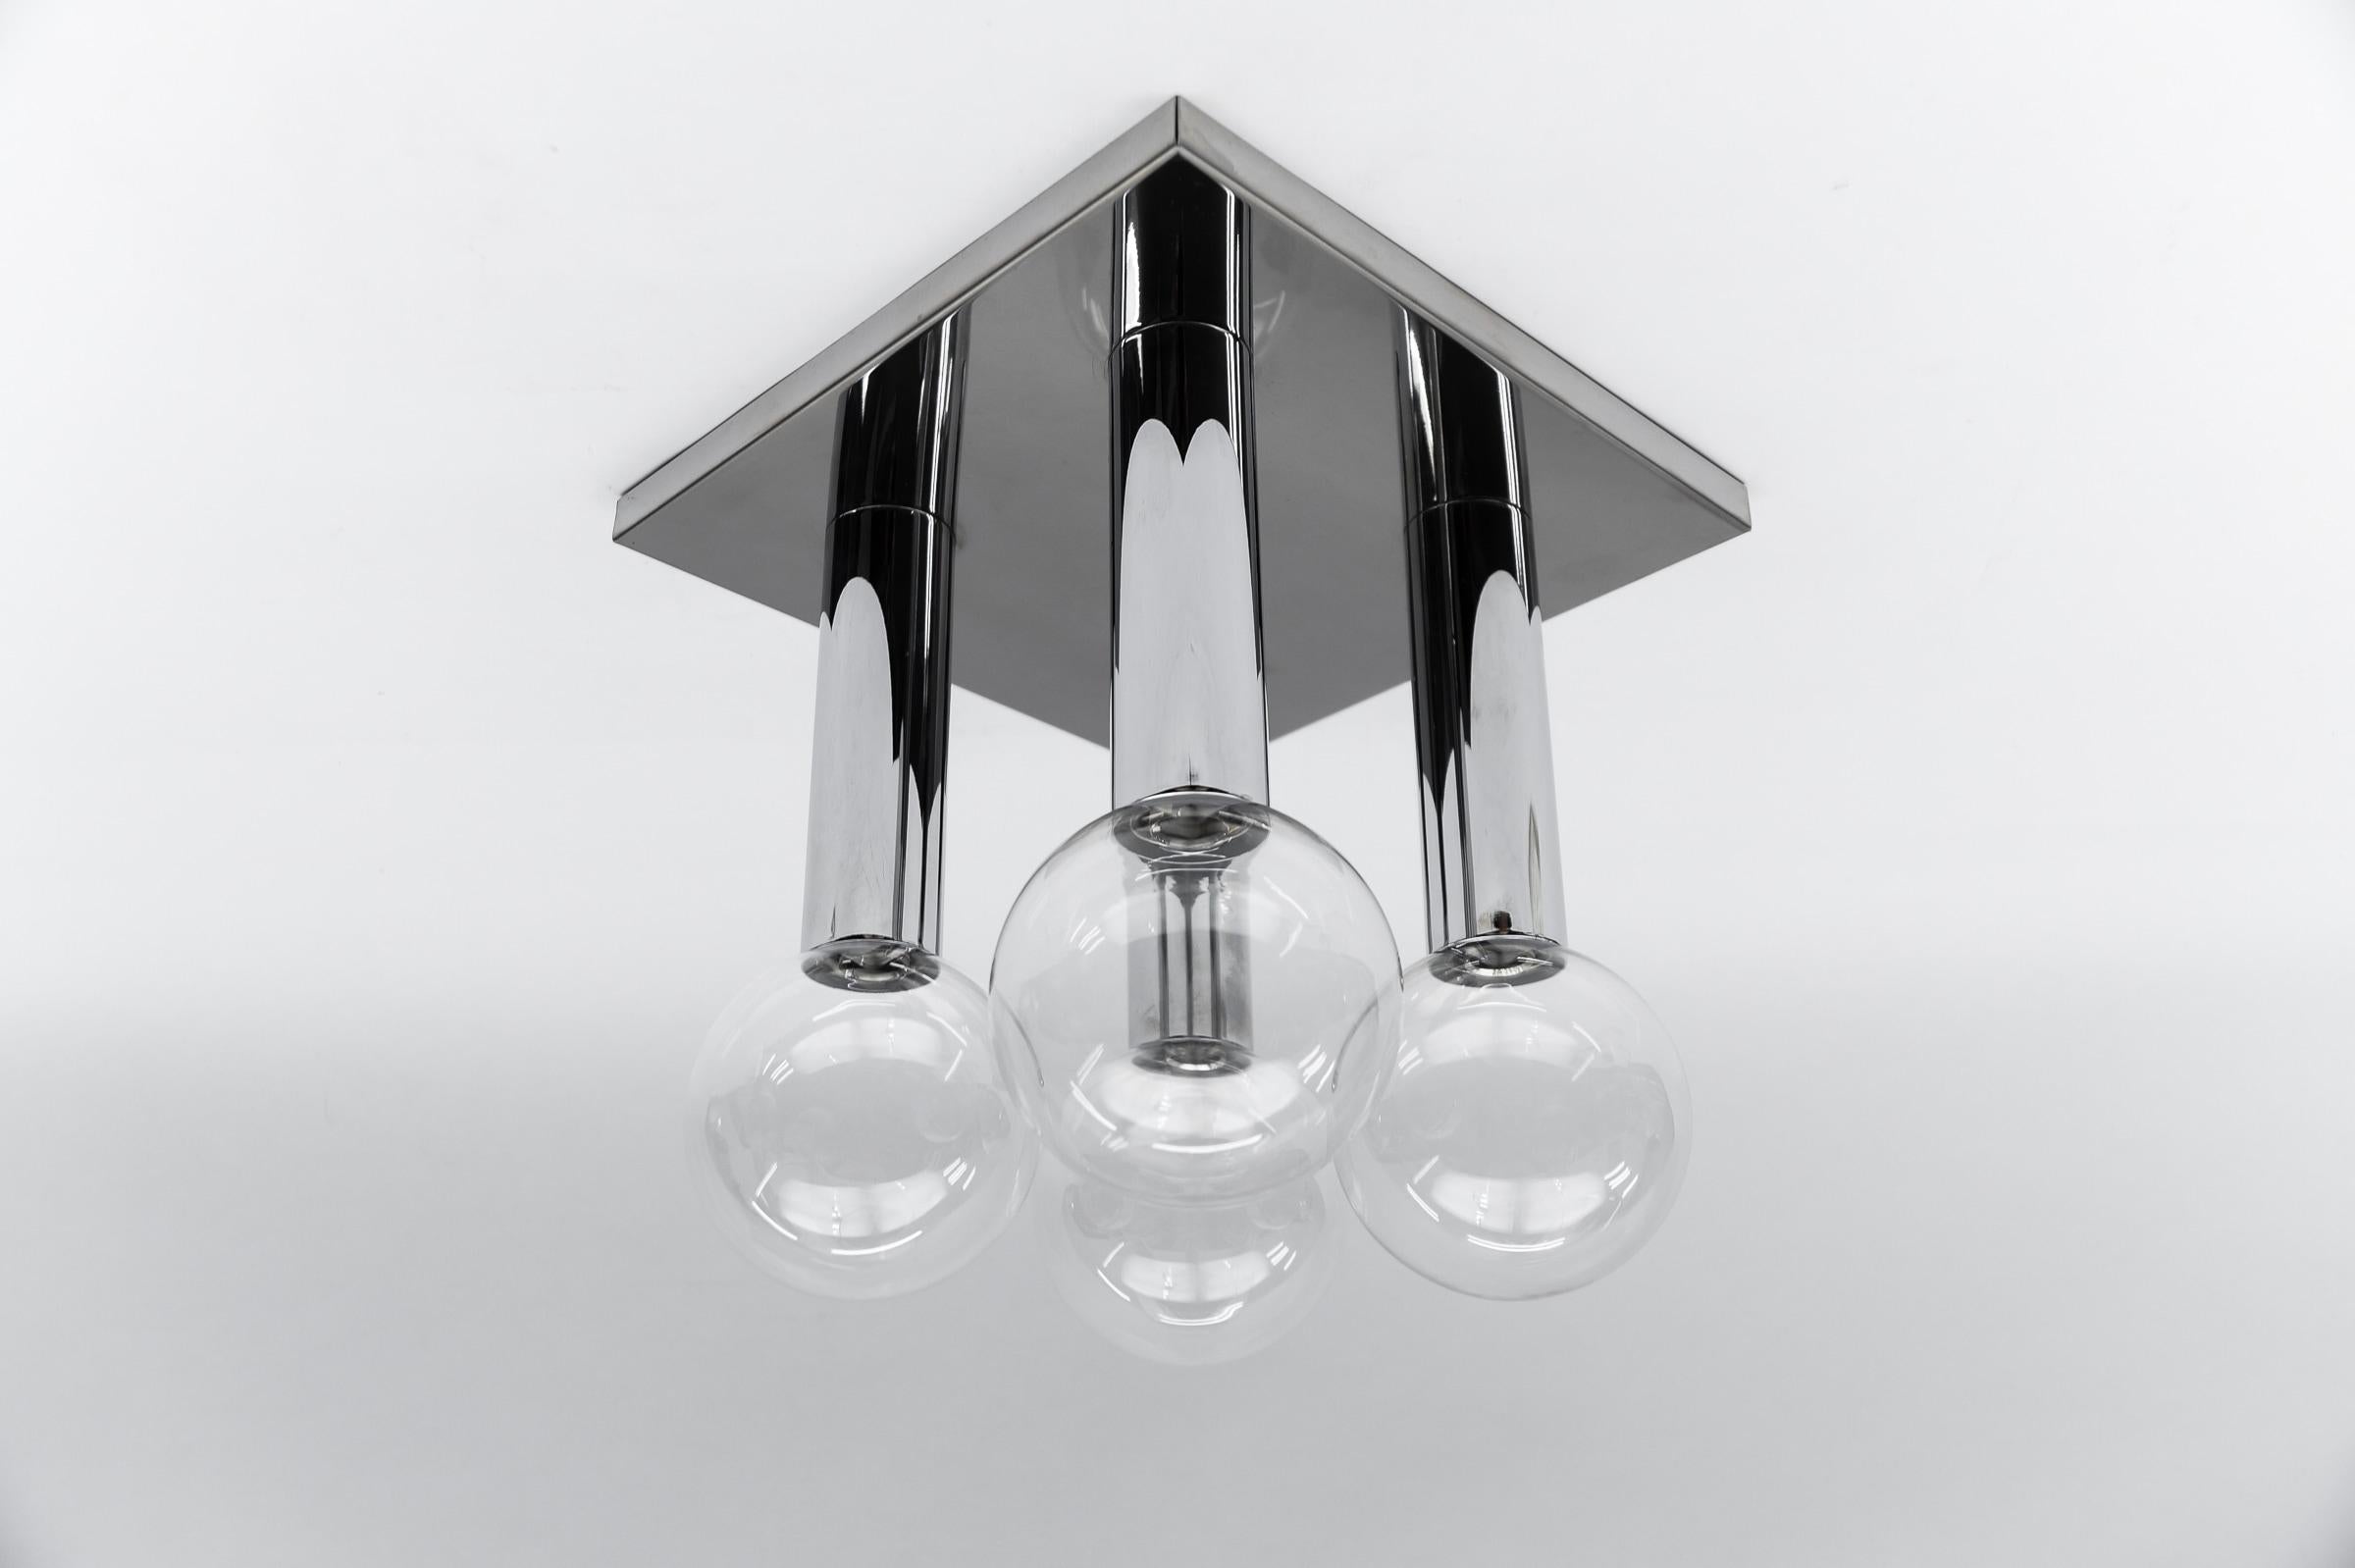 4-Light Wall or Ceiling Lamp by Motoko Ishii for Staff, 1970s

Height: 13 in (33 cm)
Width: 12.21 in (31 cm)
Depth: 12.21 in (31 cm)

The wall lamp come with 4 x E14 / E15 Edison screw fit bulb holder, is wired and in working condition. It runs both